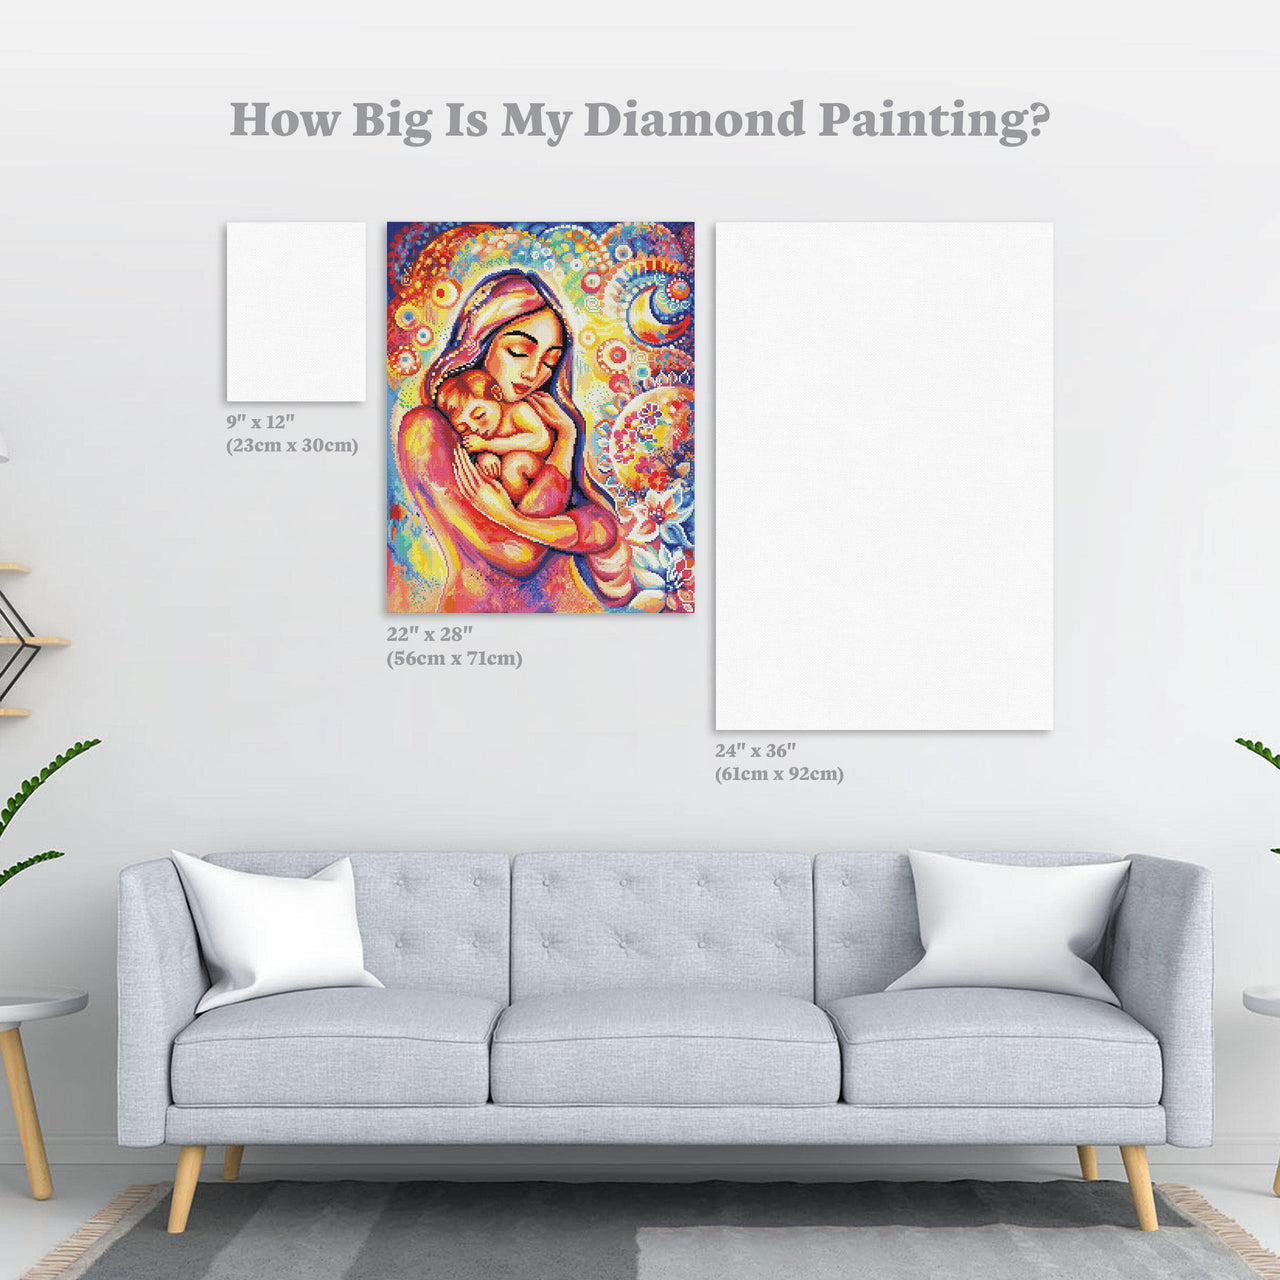 Diamond Painting Angel Dream 22" x 28″ (56cm x 71cm) / Round With 46 Colors Including 2 ABs